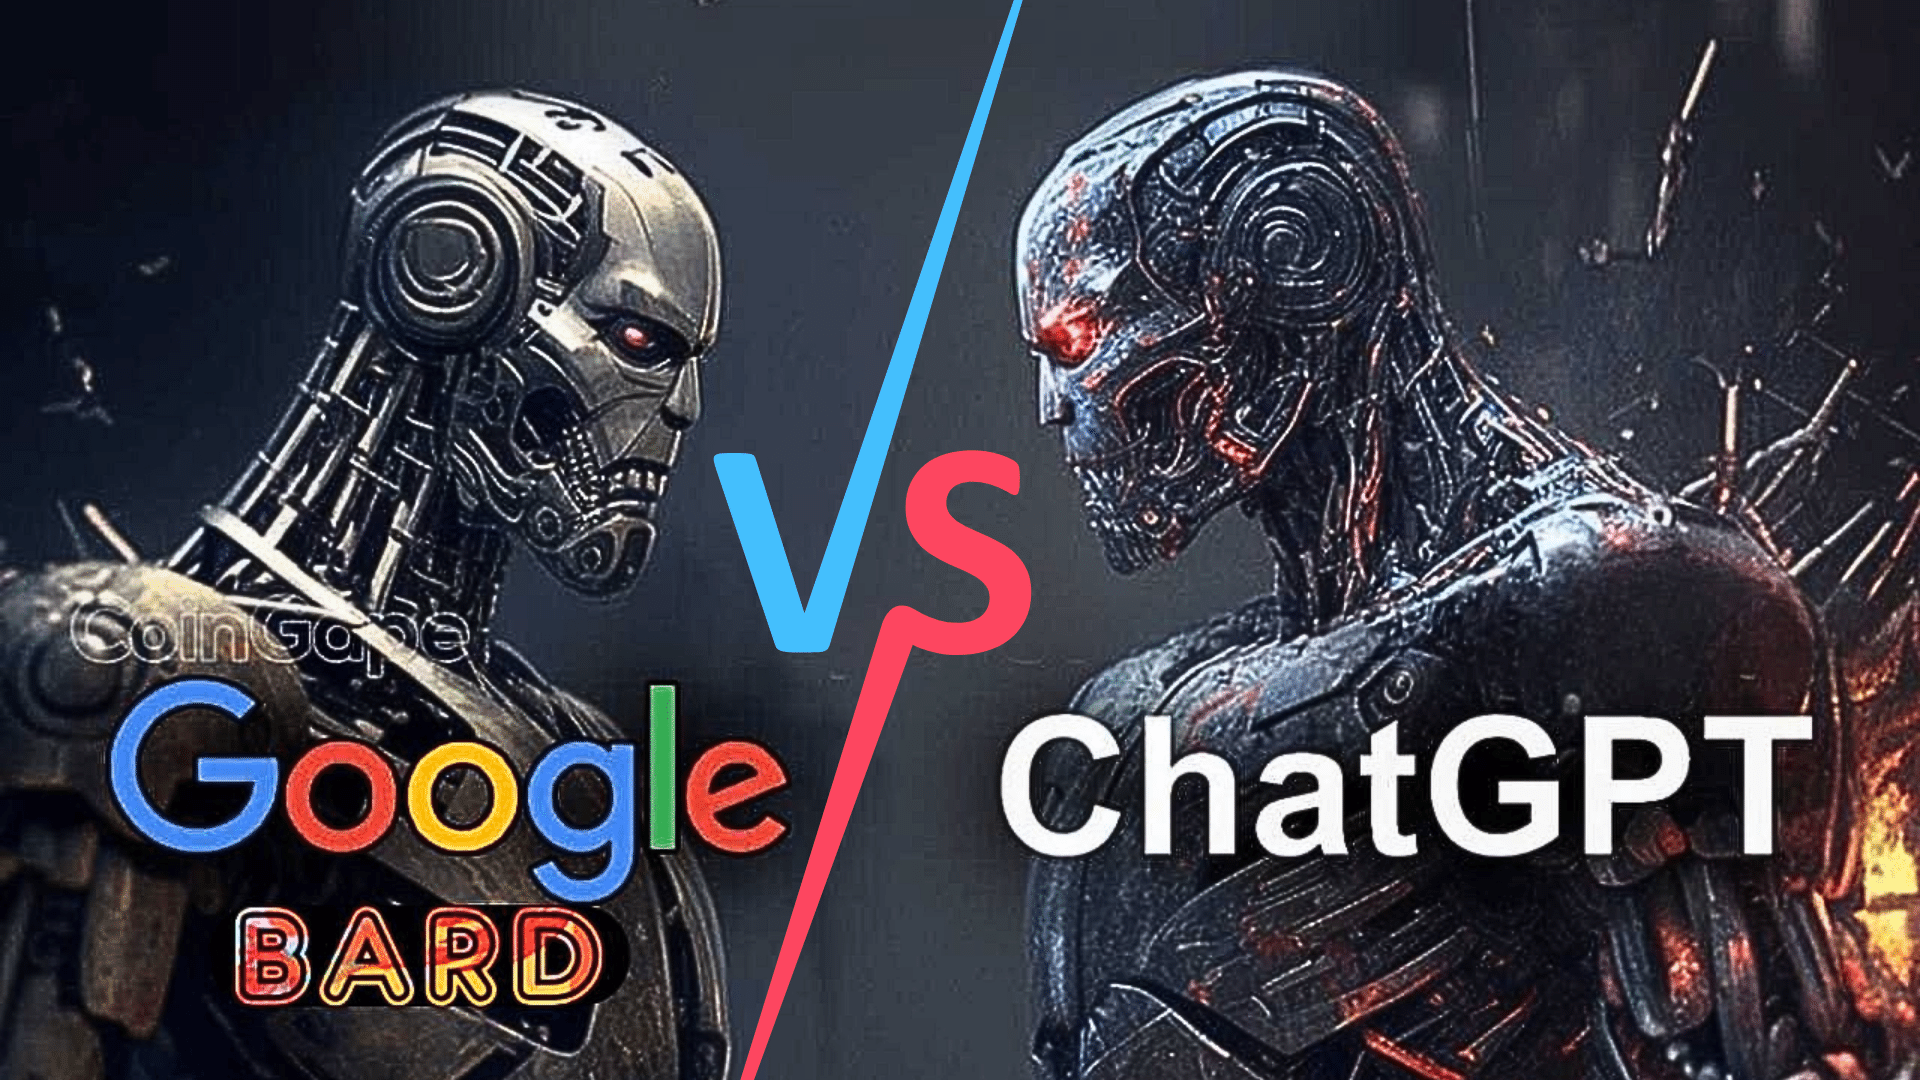 ChatGPT vs. Google BARD: The Ultimate Face-Off of AI